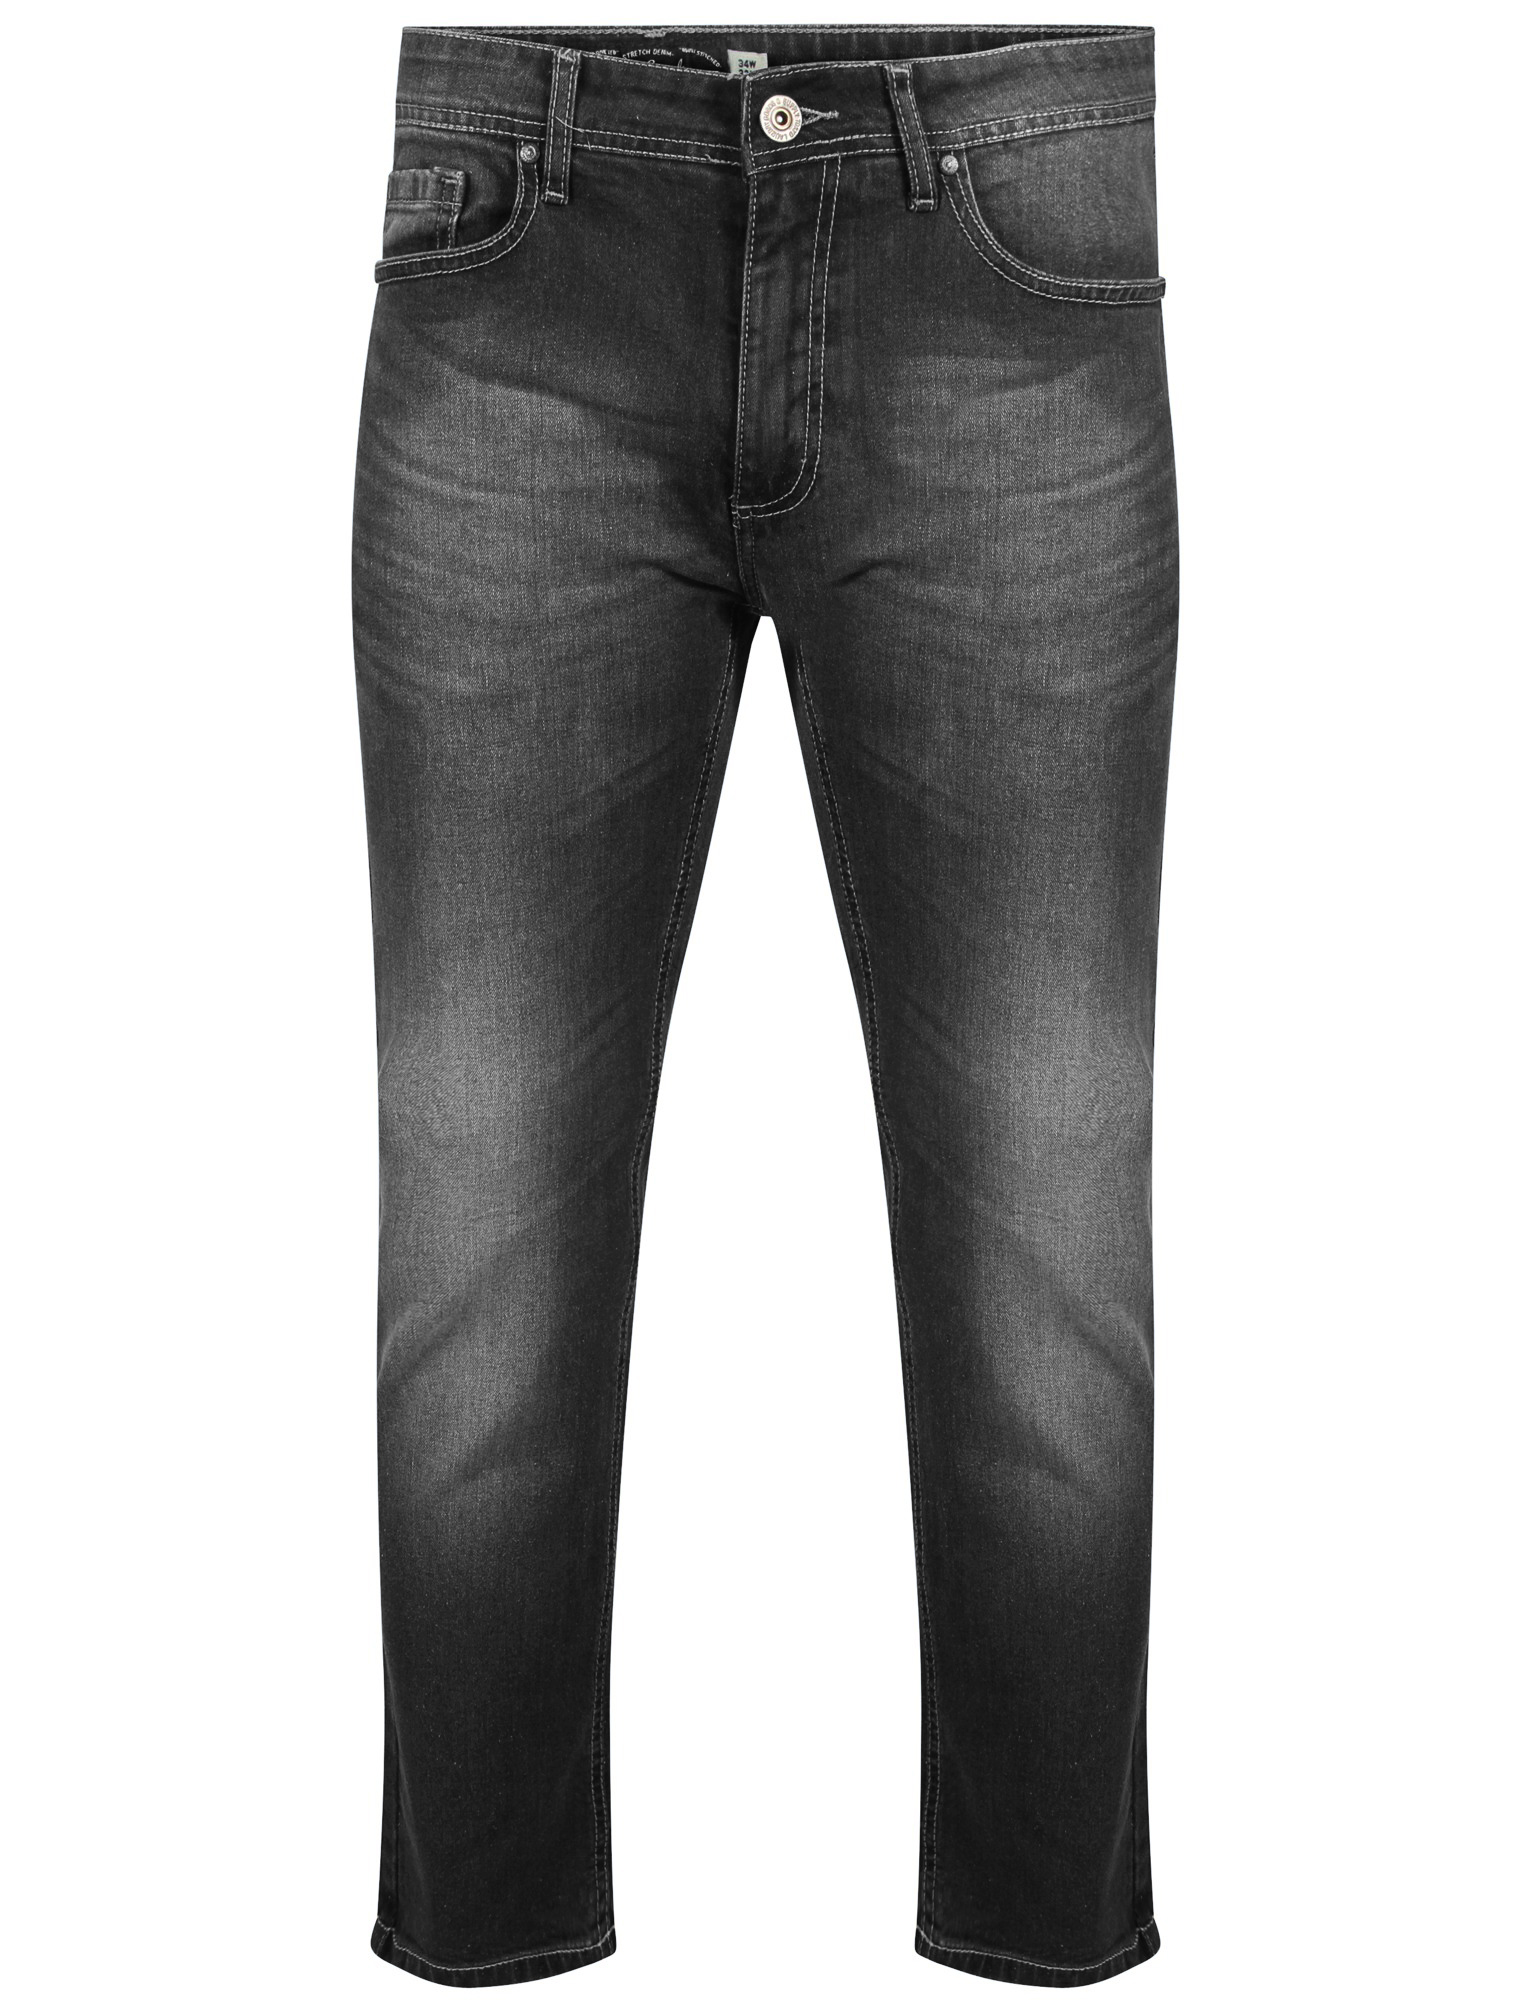 black stone washed jeans mens